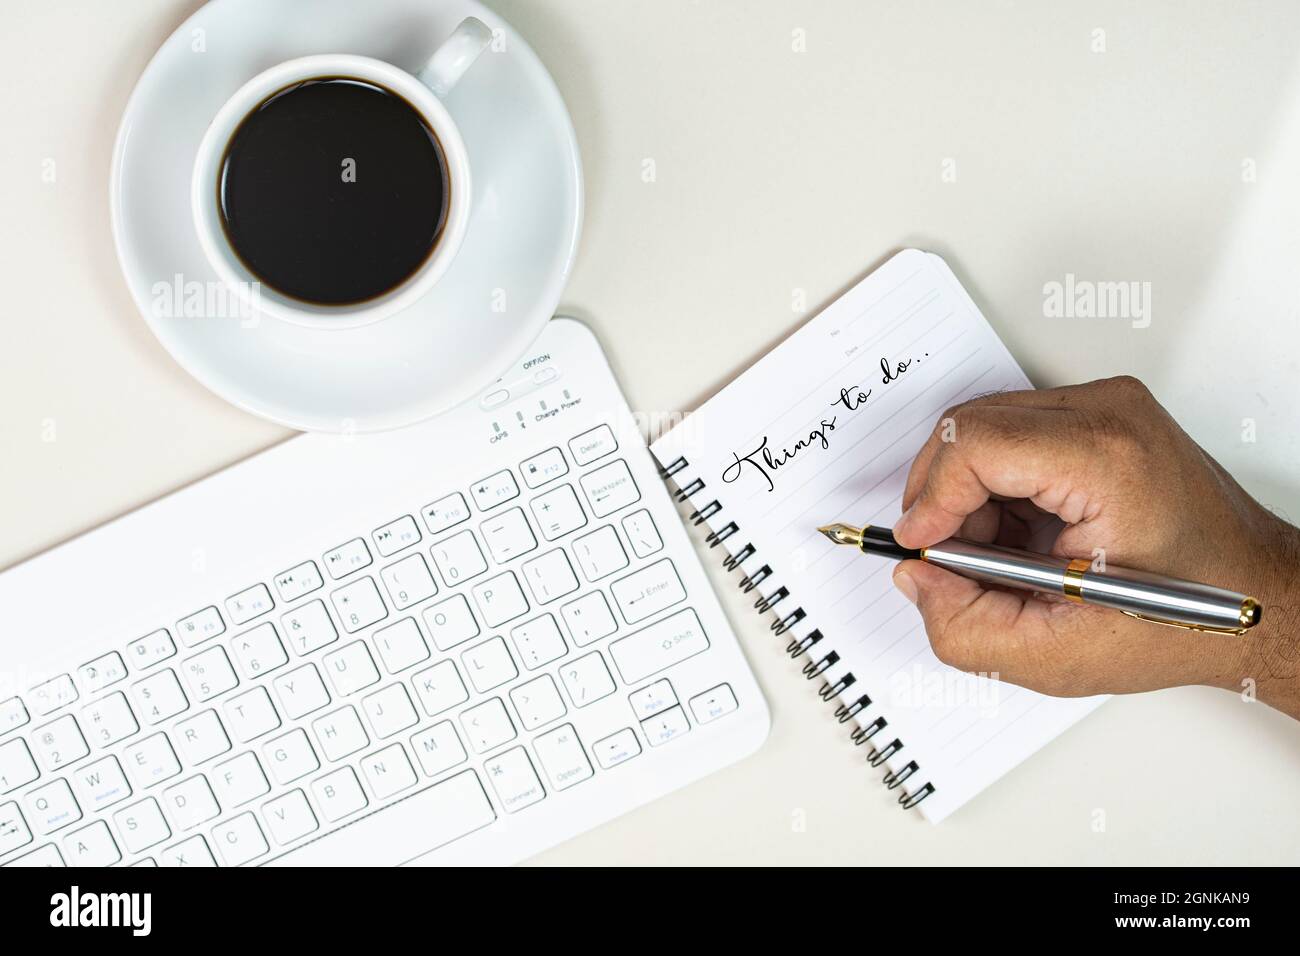 Working from home concept. Hand writing in a note book, keyboard and a cup of coffee. Selective focus points Stock Photo